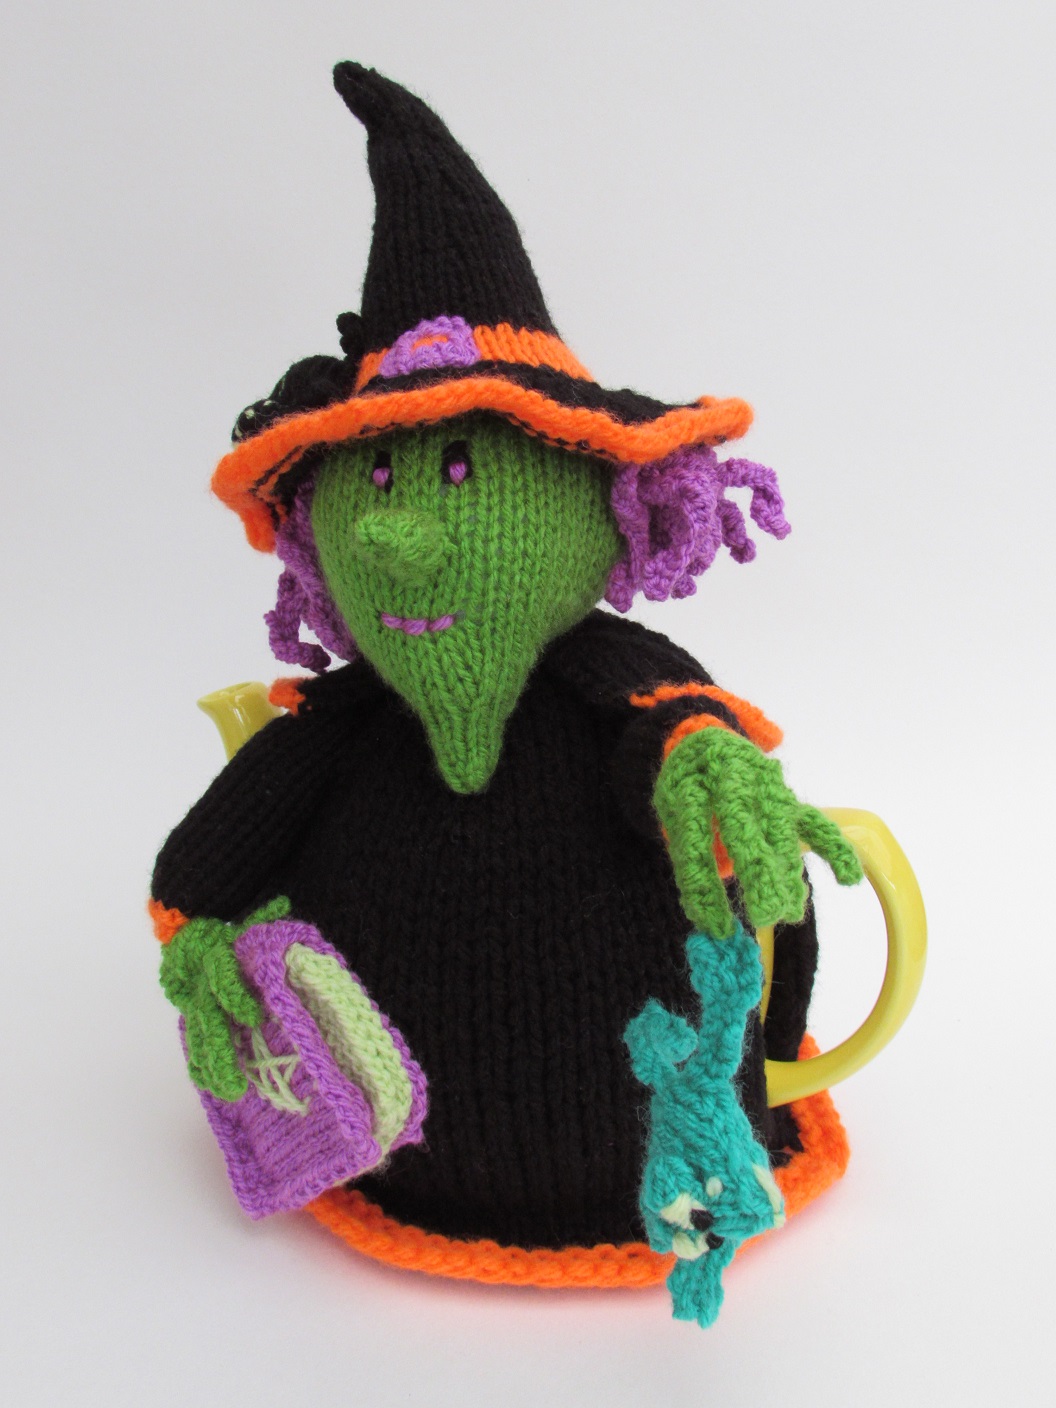 Witches Brew knitting pattern